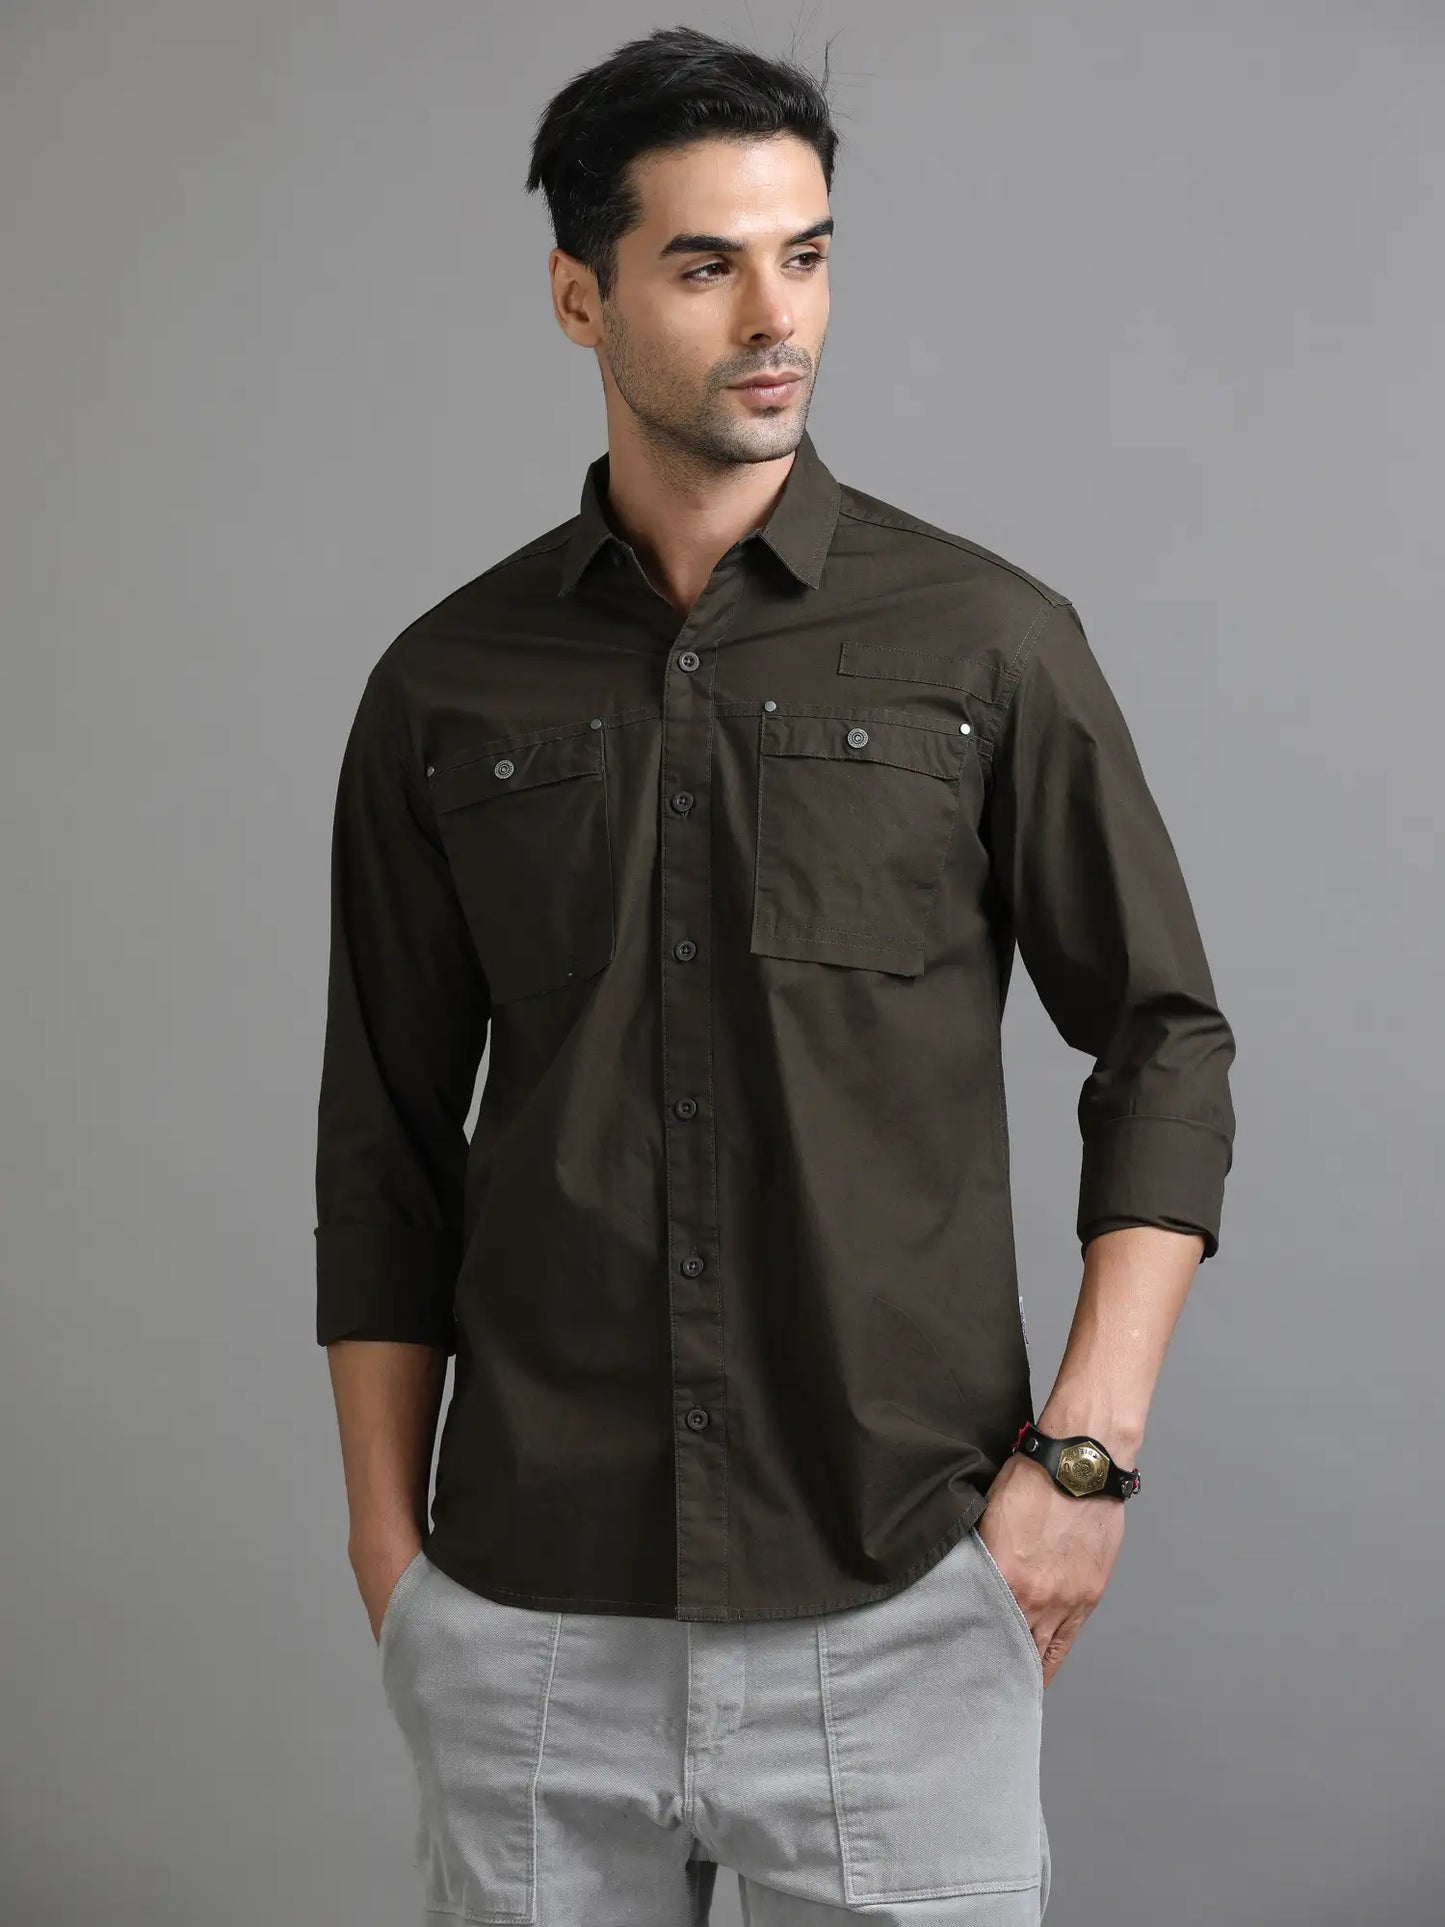 All about Olive Solid Shirt for Men